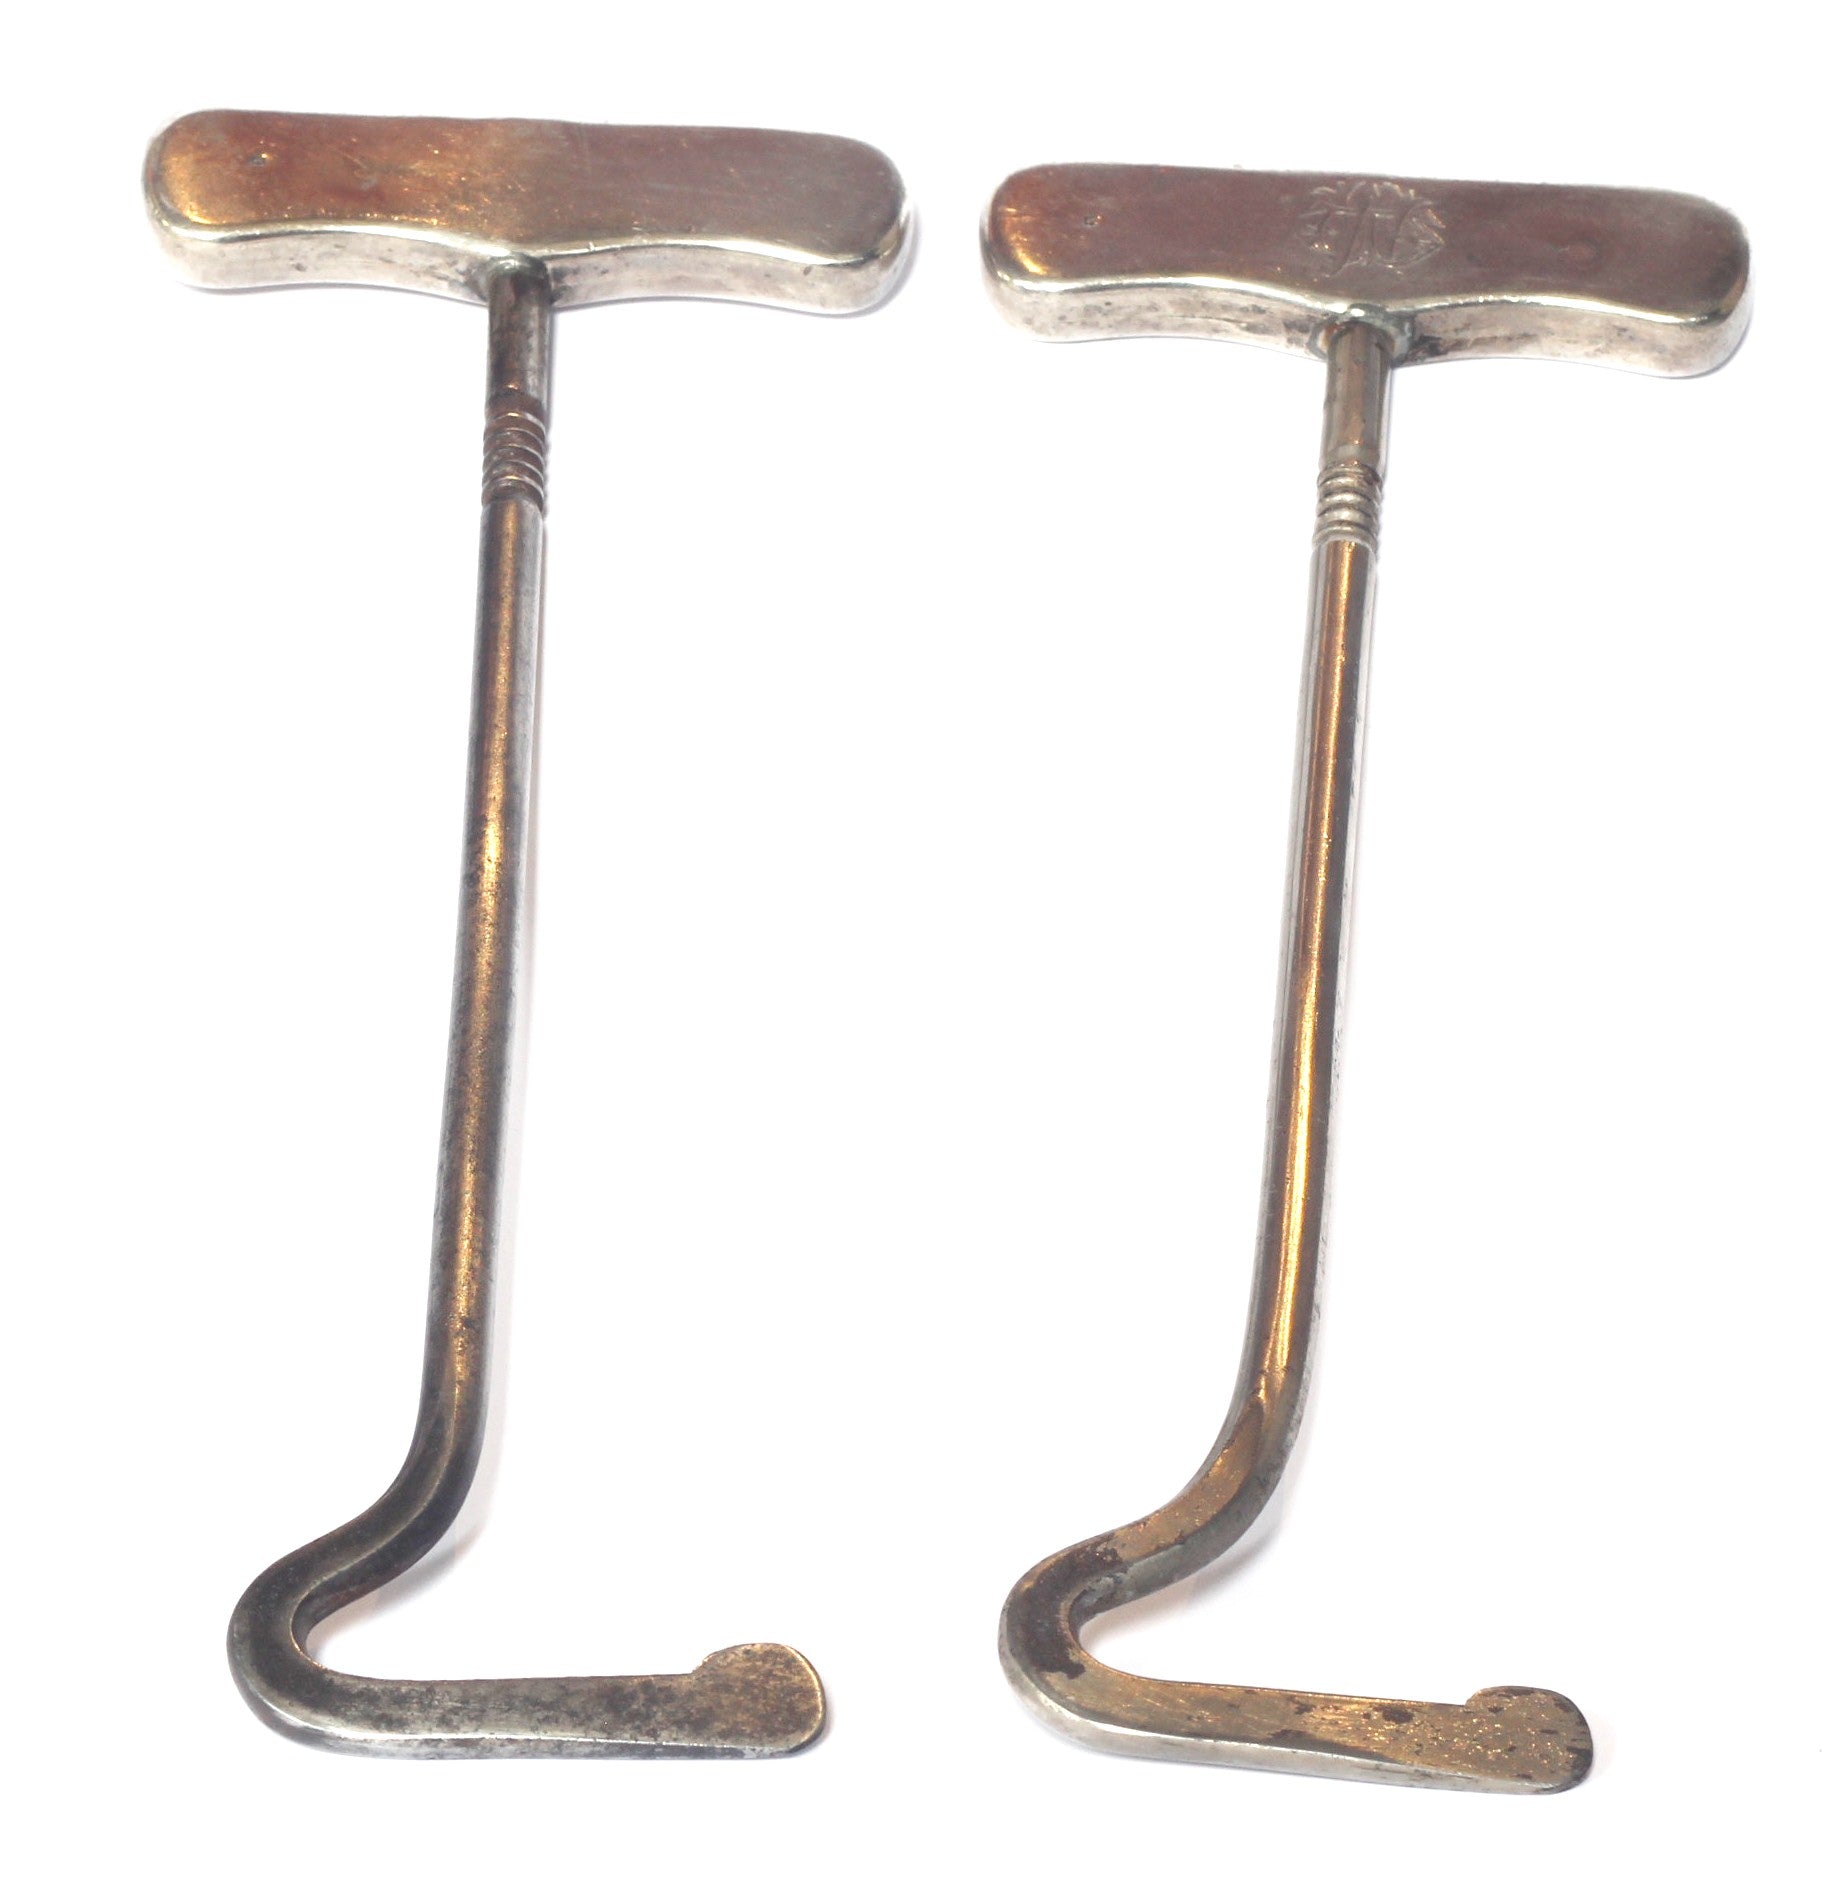 1893 Silver Handled Boot Pulls or Hooks